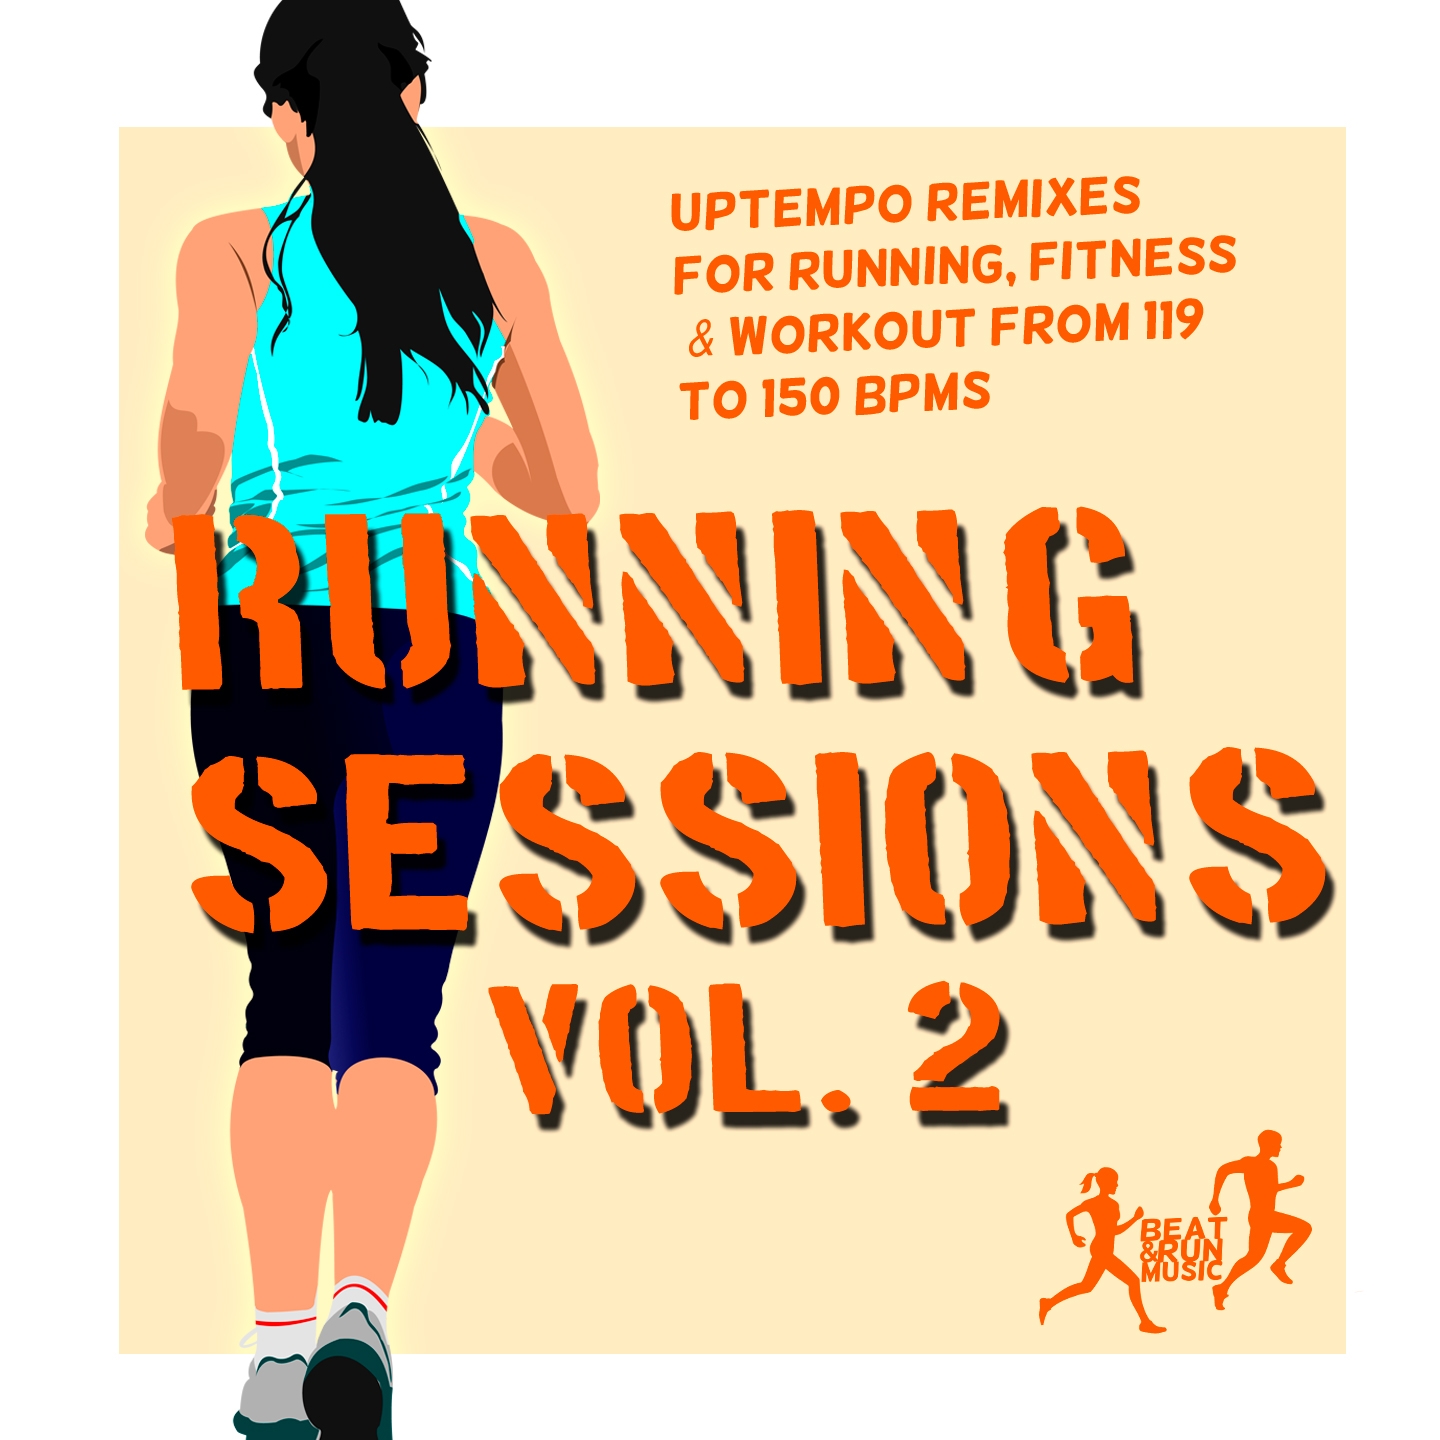 Running Sessions, Vol. 2 (Uptempo Remixes For Running, Fitness And Workout From 119 To 150 Bpms)